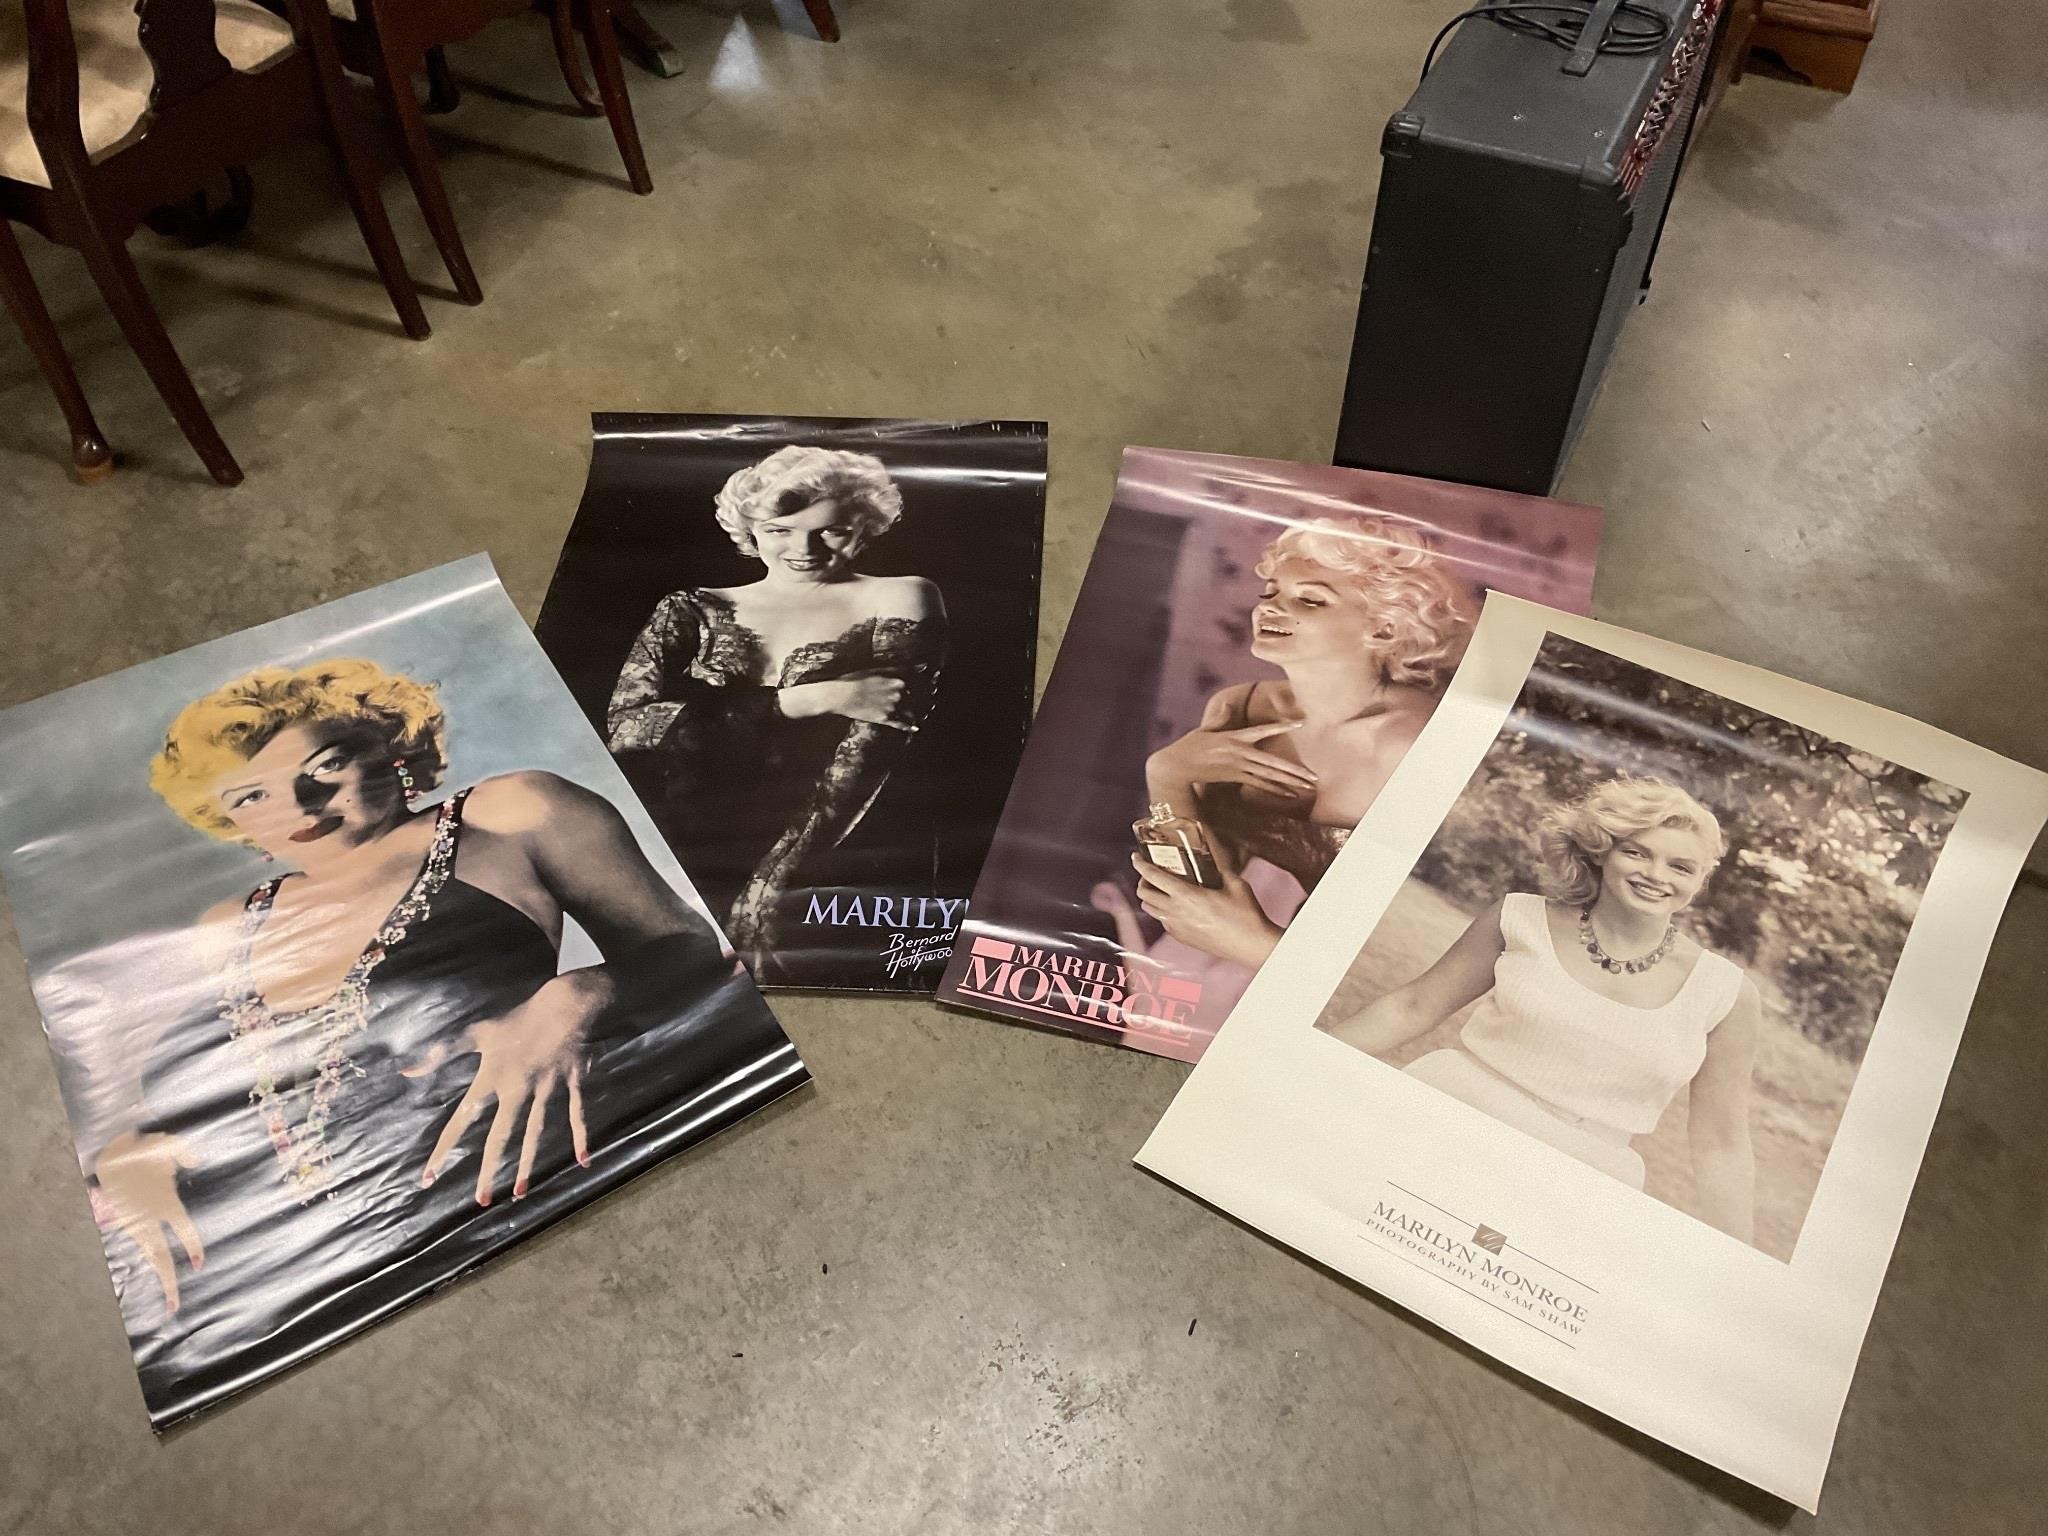 For Marilyn Monroe posters